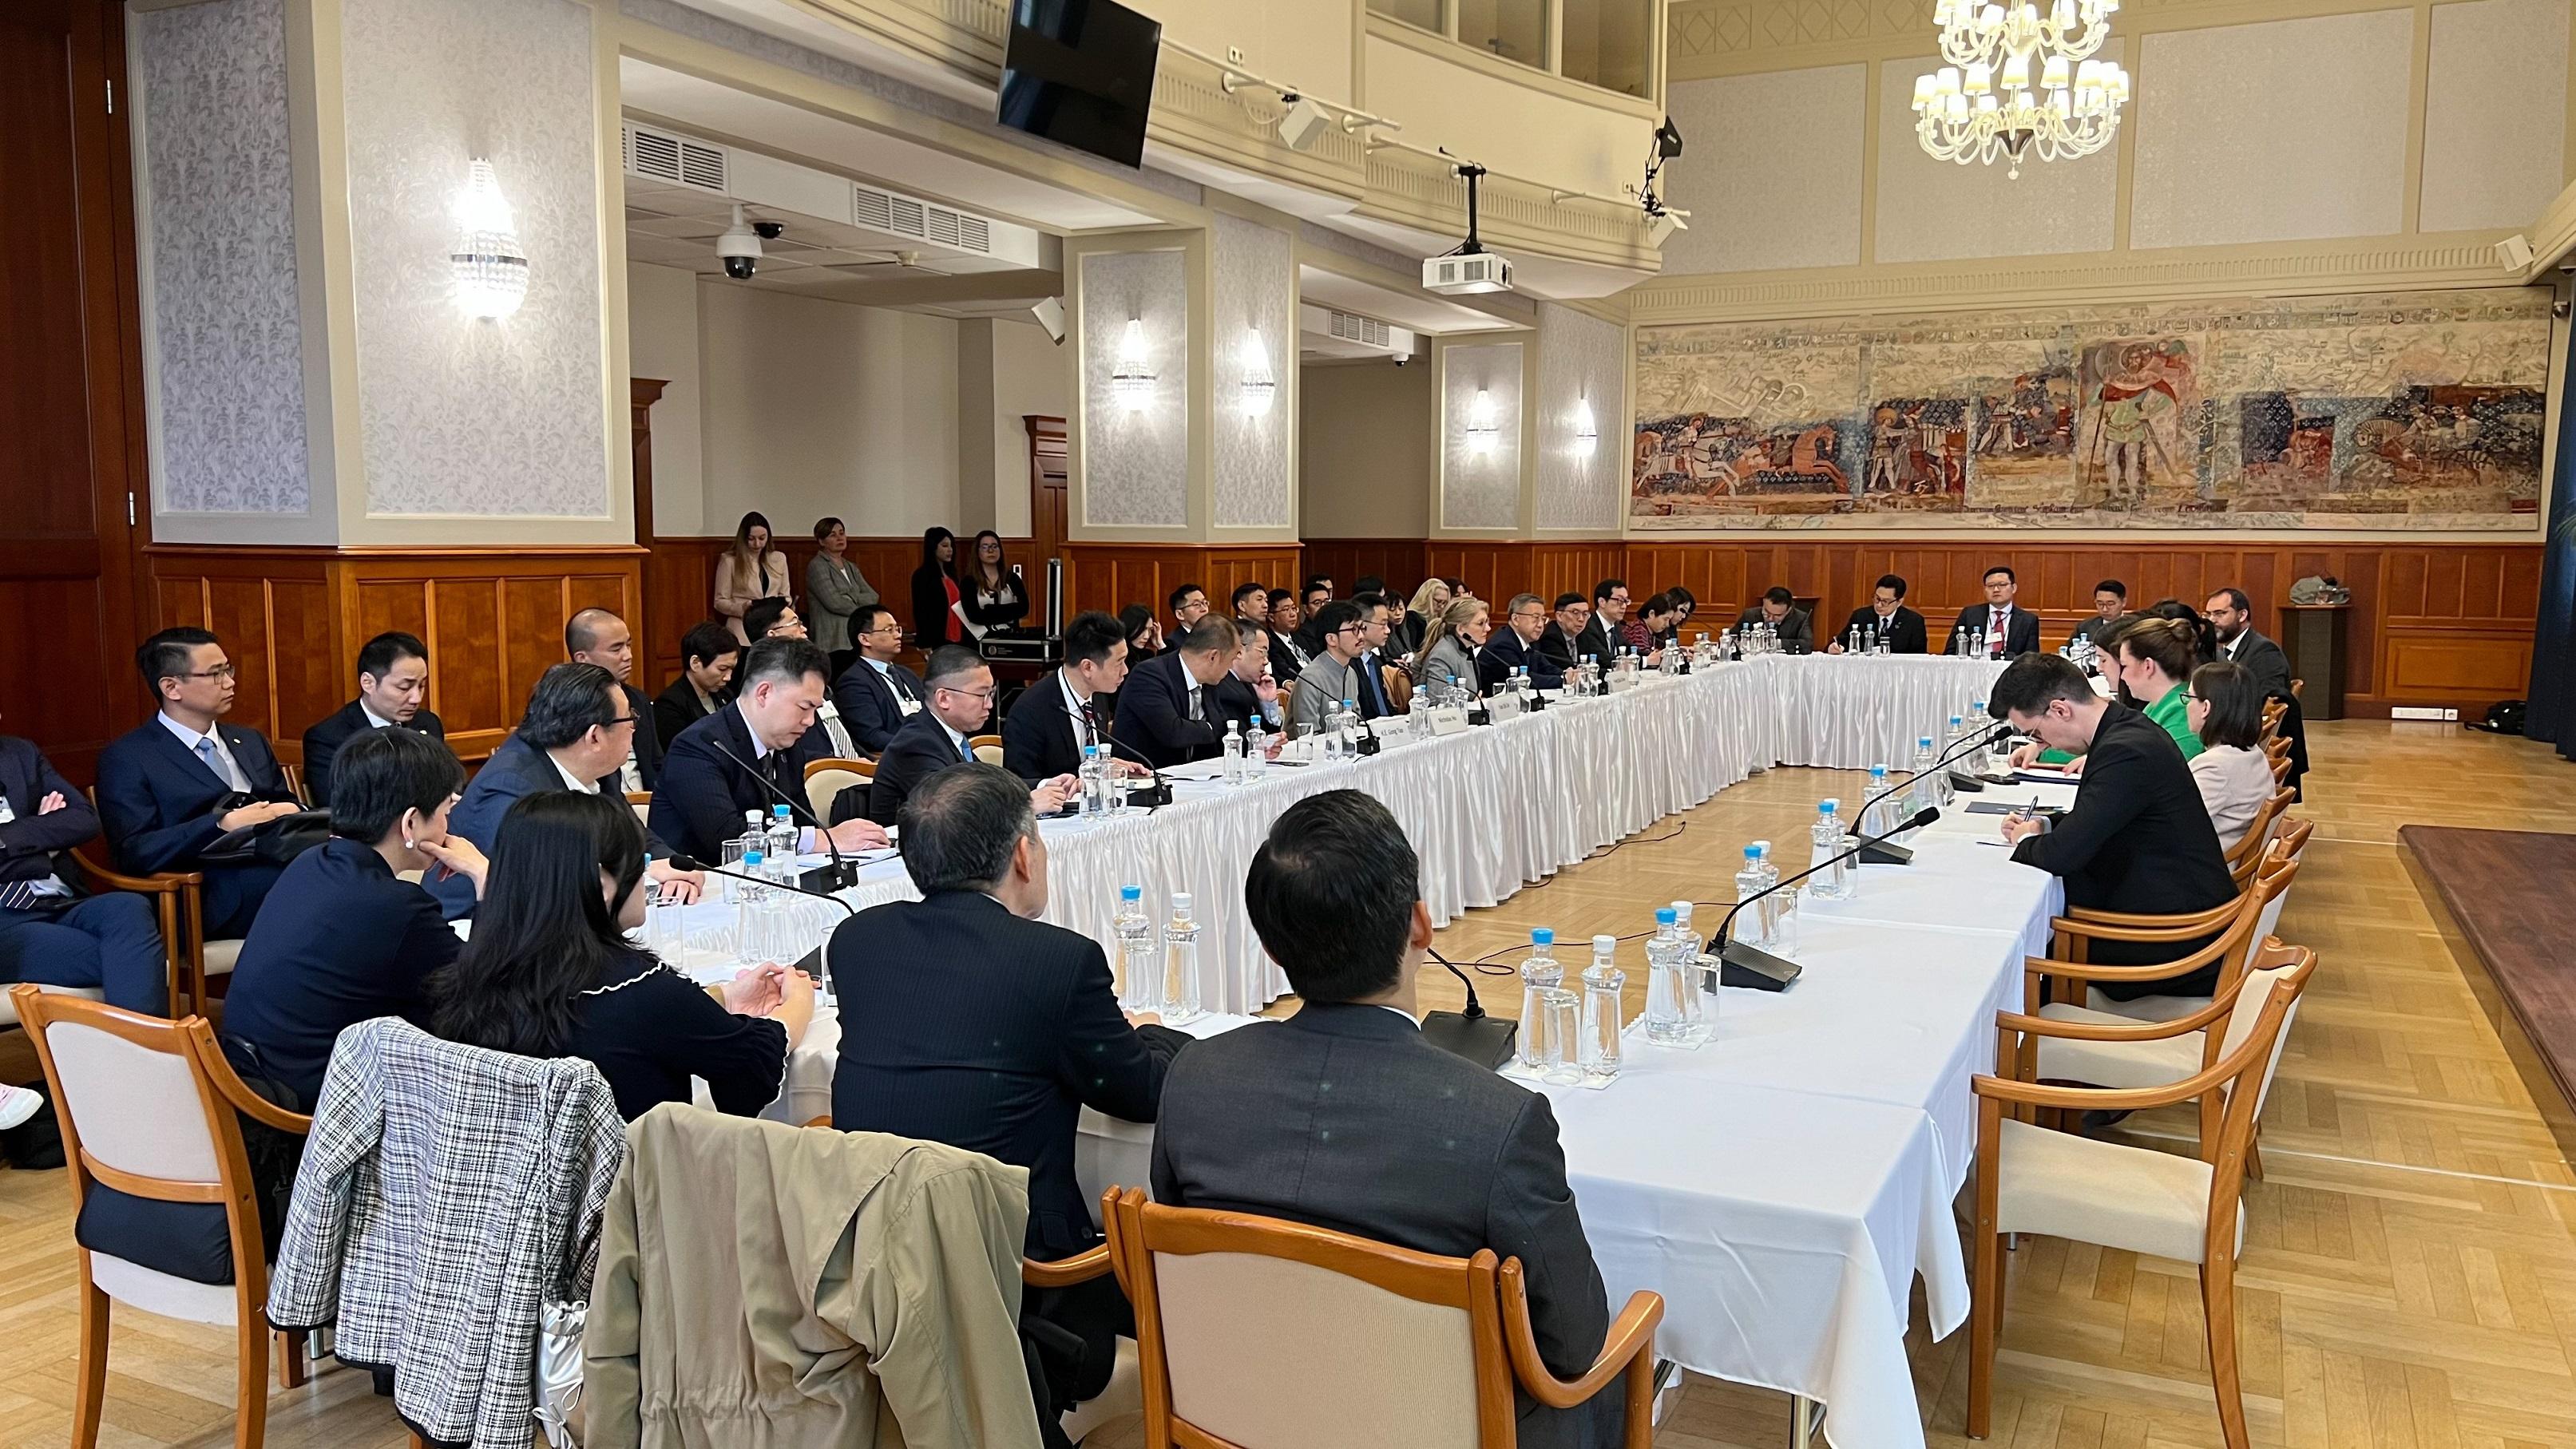 The Mainland-Hong Kong joint business mission visited Hungary and Kazakhstan from May 16 to 22. Photo shows the mission meeting with officials of the Ministry of Foreign Affairs and Trade of Hungary in Budapest on May 17.